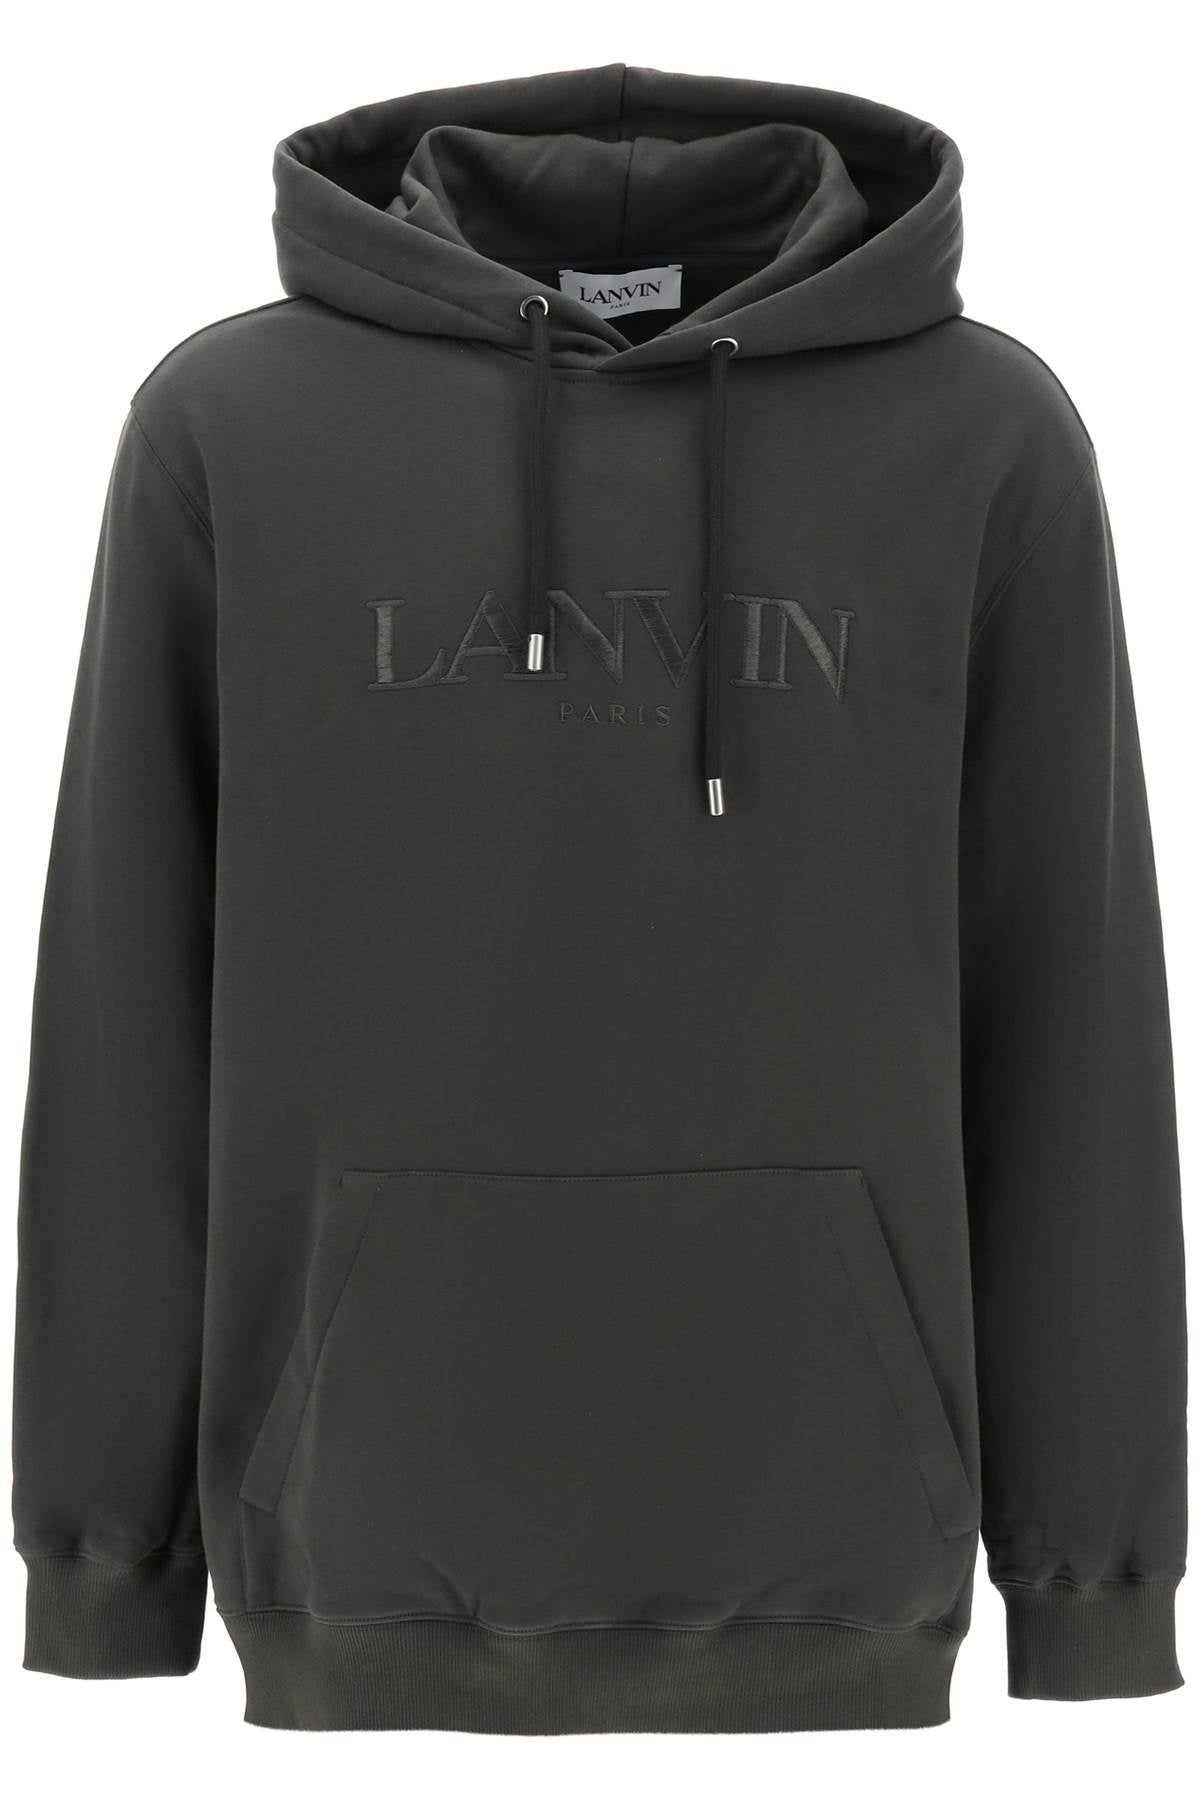 LANVIN Green Embroidered Hoodie for Men - FW23 Collection